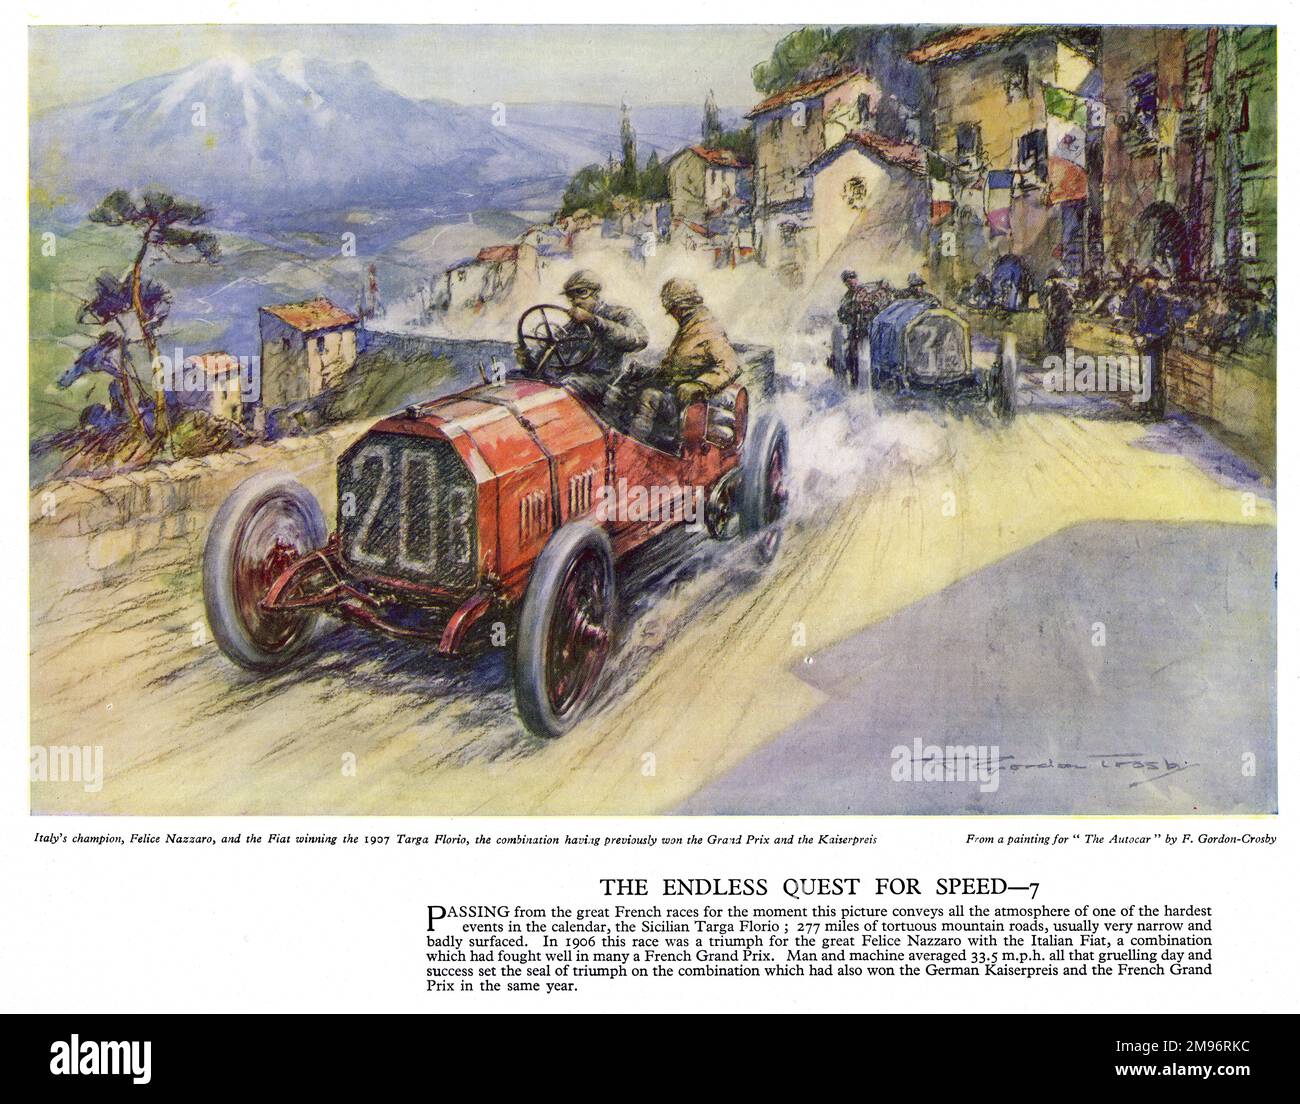 Autocar Poster -- Italian champion Felice Nazzaro driving the Fiat car in which he won the Targa Florio race in Sicily.  His average speed for the race was around 33 mph on gruelling mountain roads. Stock Photo